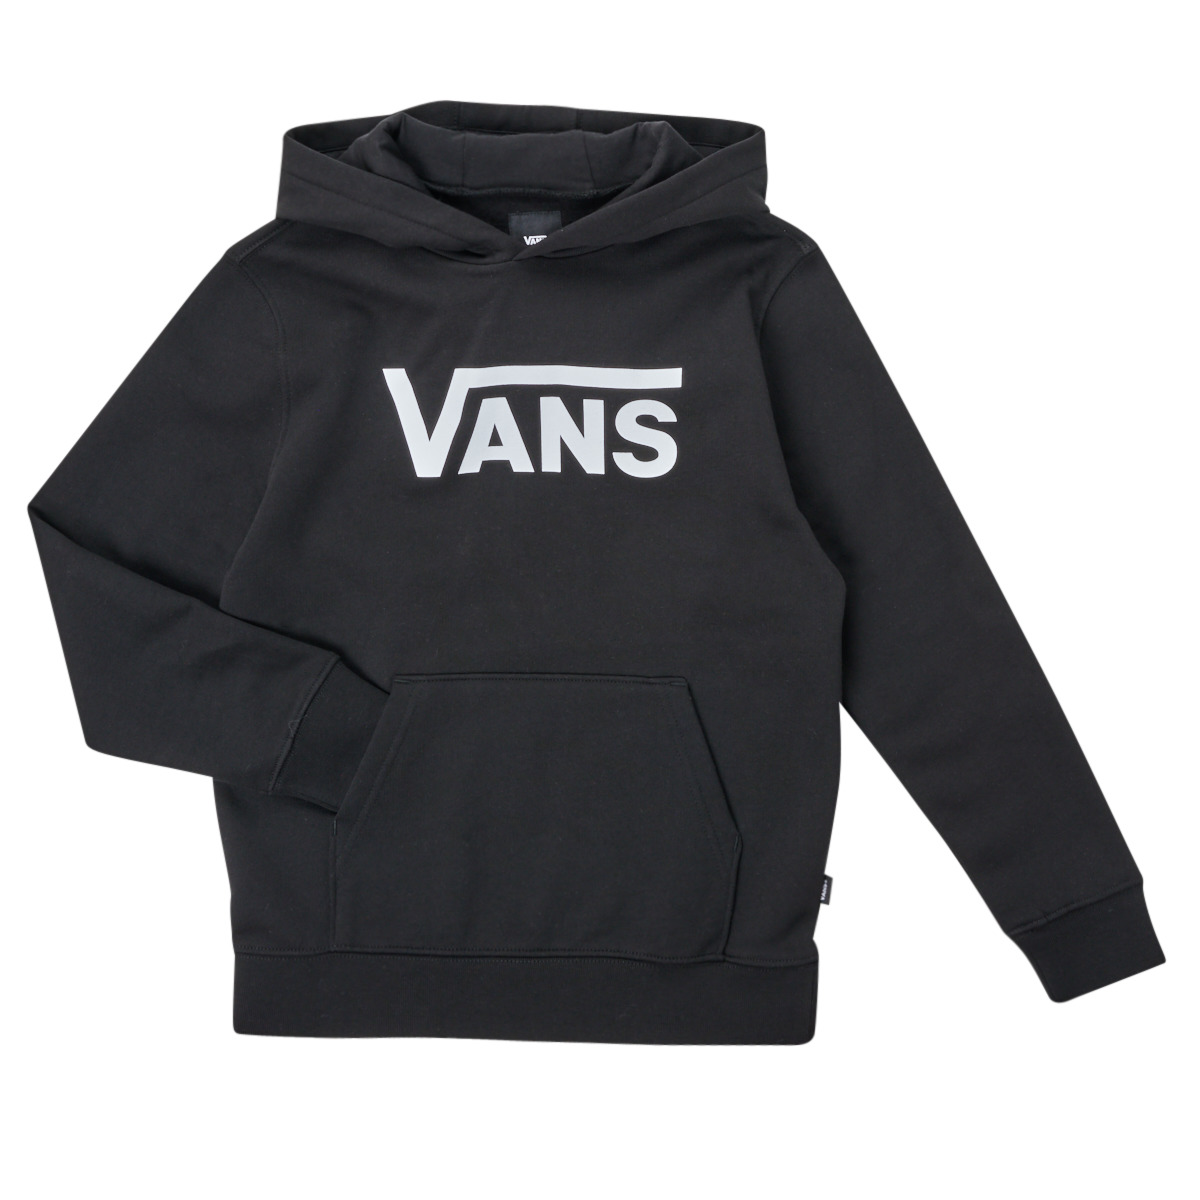 NET Black ! delivery CLASSIC Vans VANS BY Clothing - Free - Spartoo sweaters KIDS Child | PO